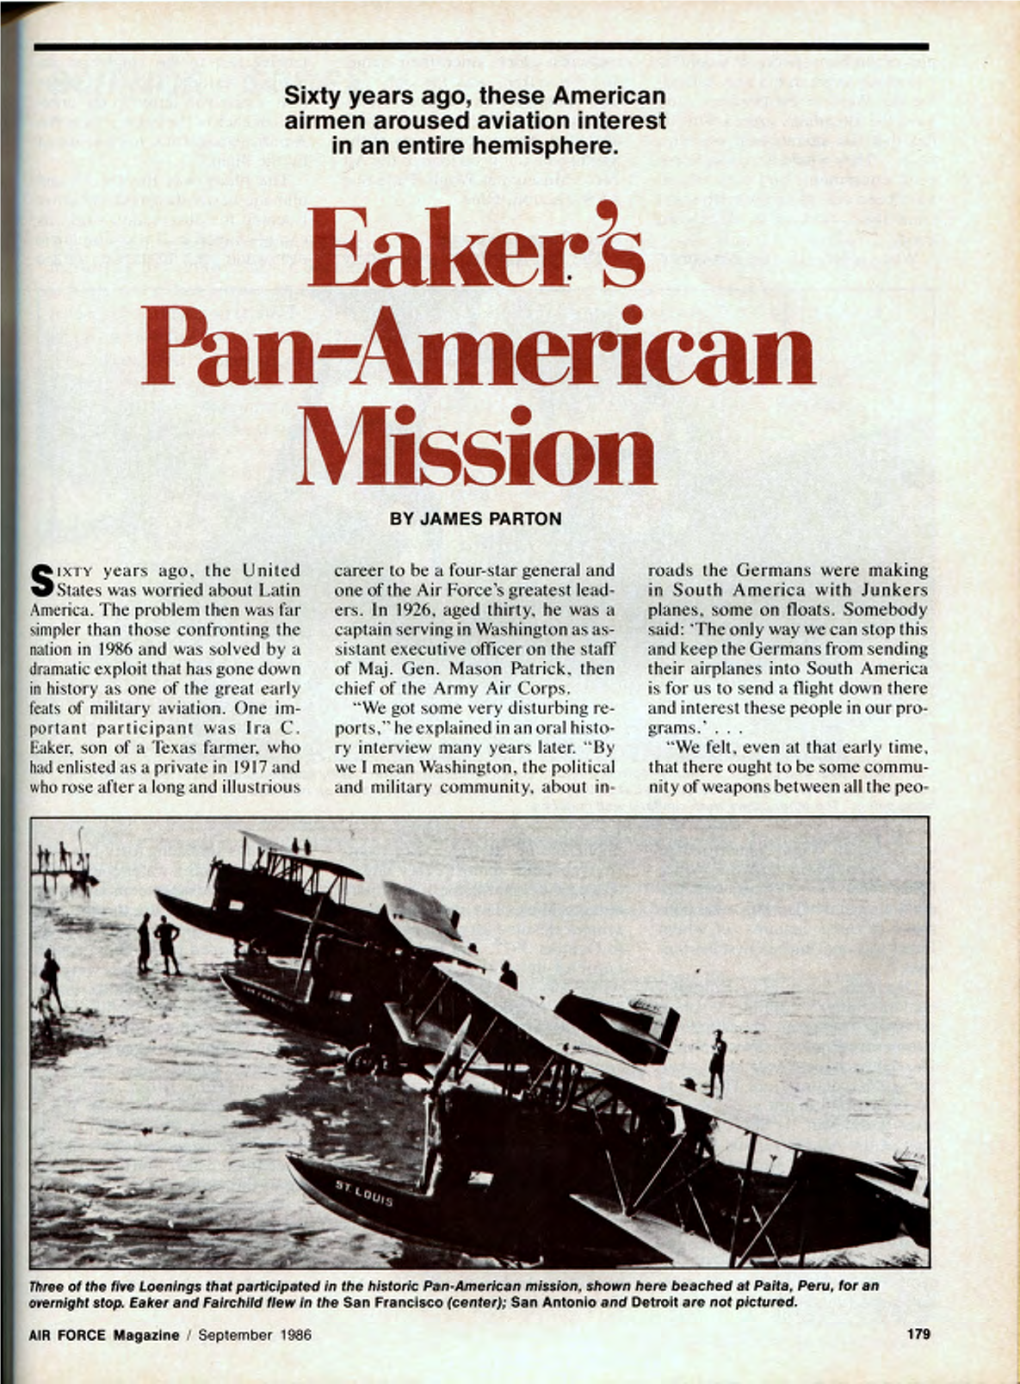 Faker's Pan-American Mission by JAMES PARTON